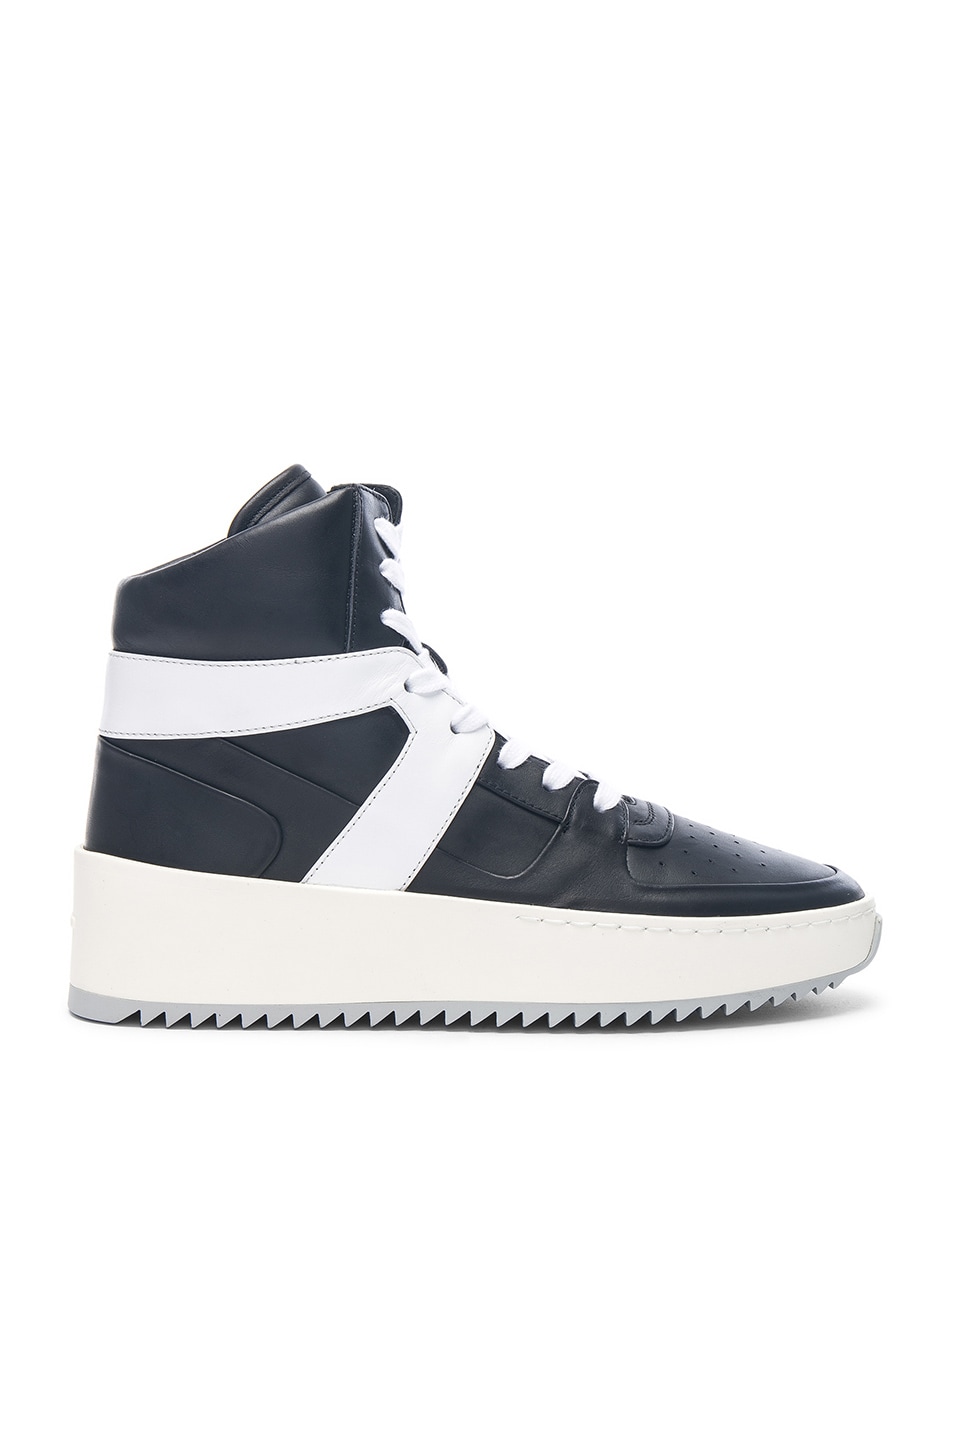 Image 1 of Fear of God Leather Basketball Sneakers in Black & White